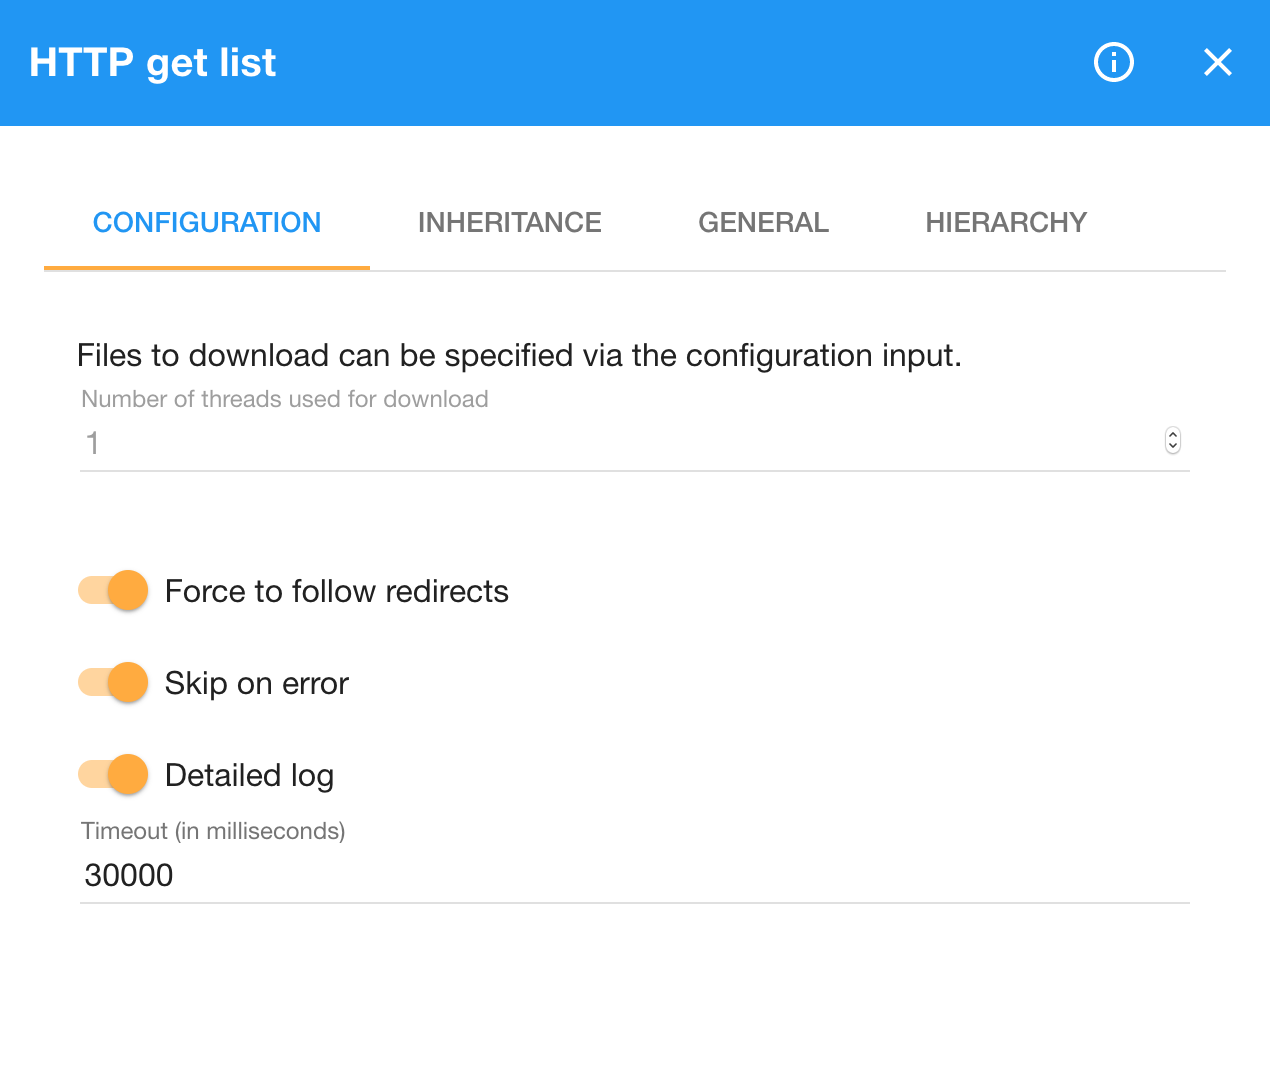 Configuration of HTTP GET list